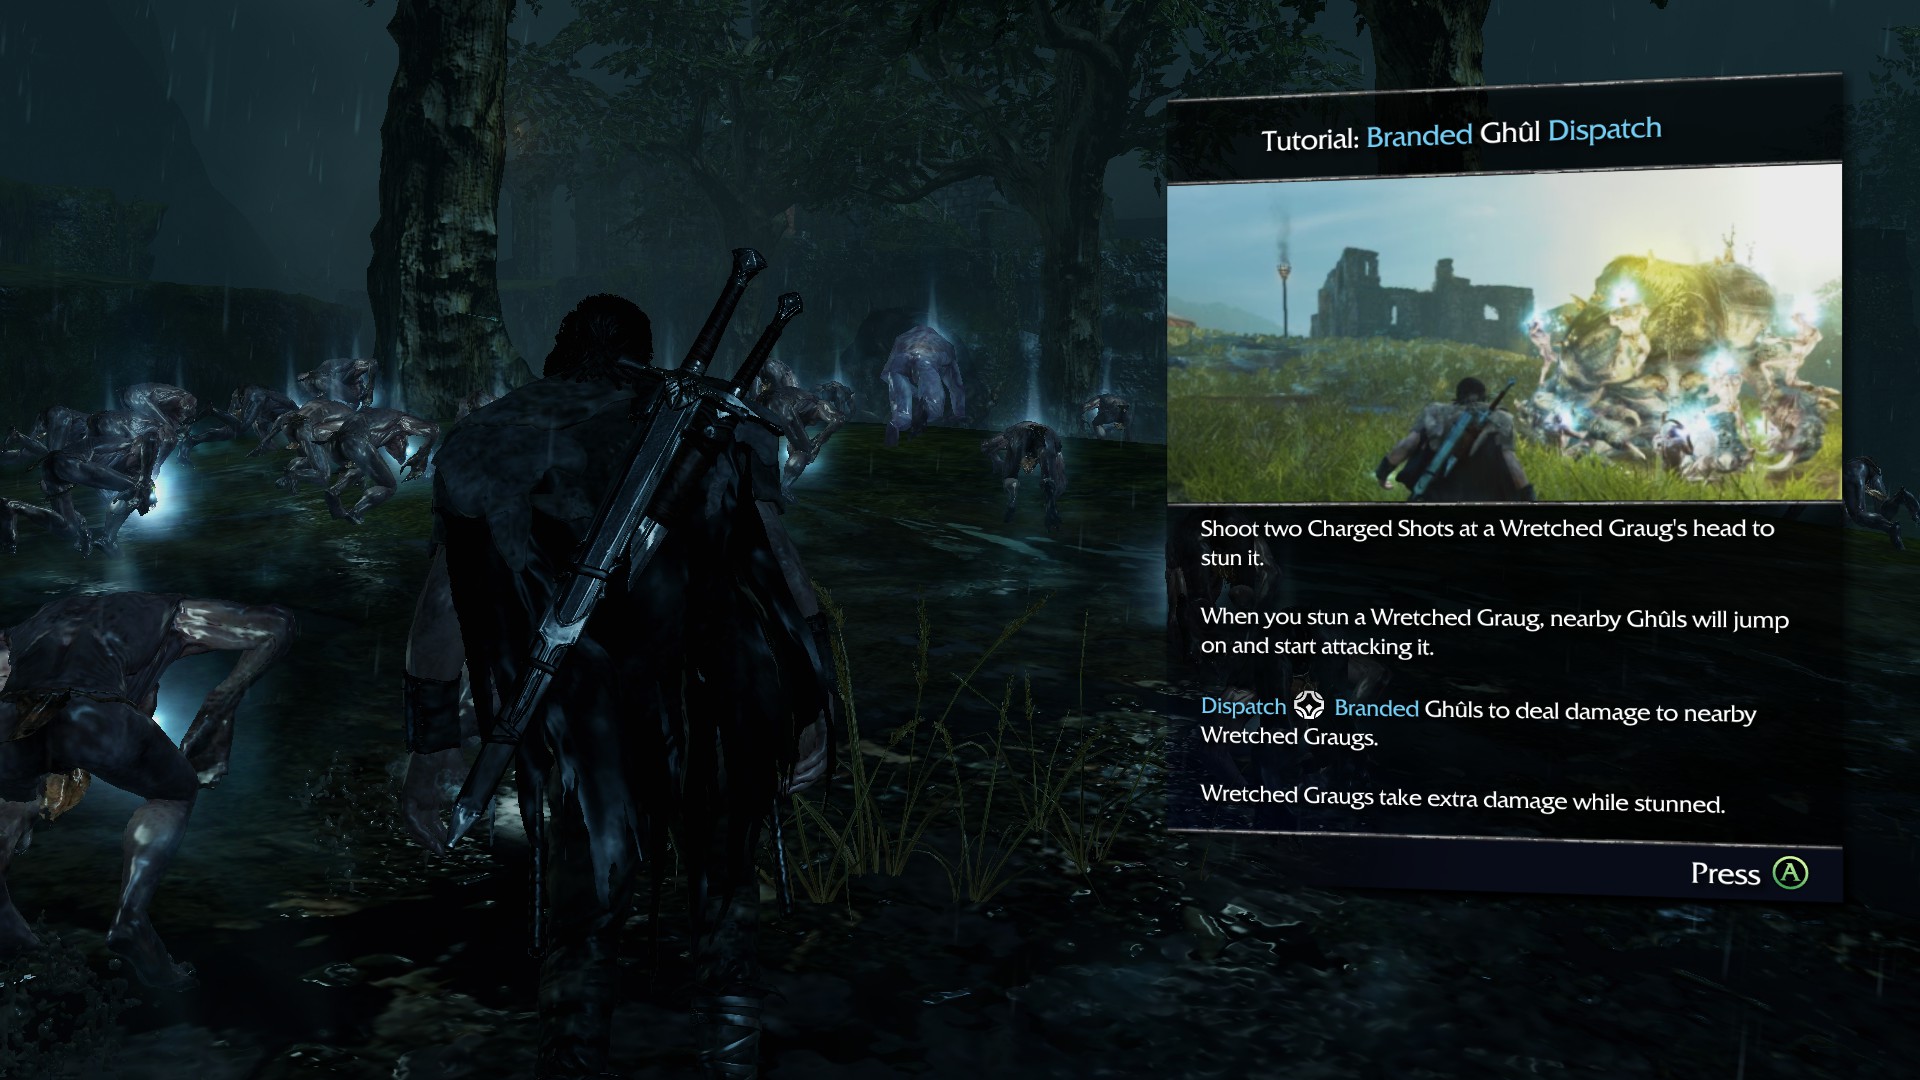 The Spirit of Mordor achievement in Middle-earth: Shadow of Mordor